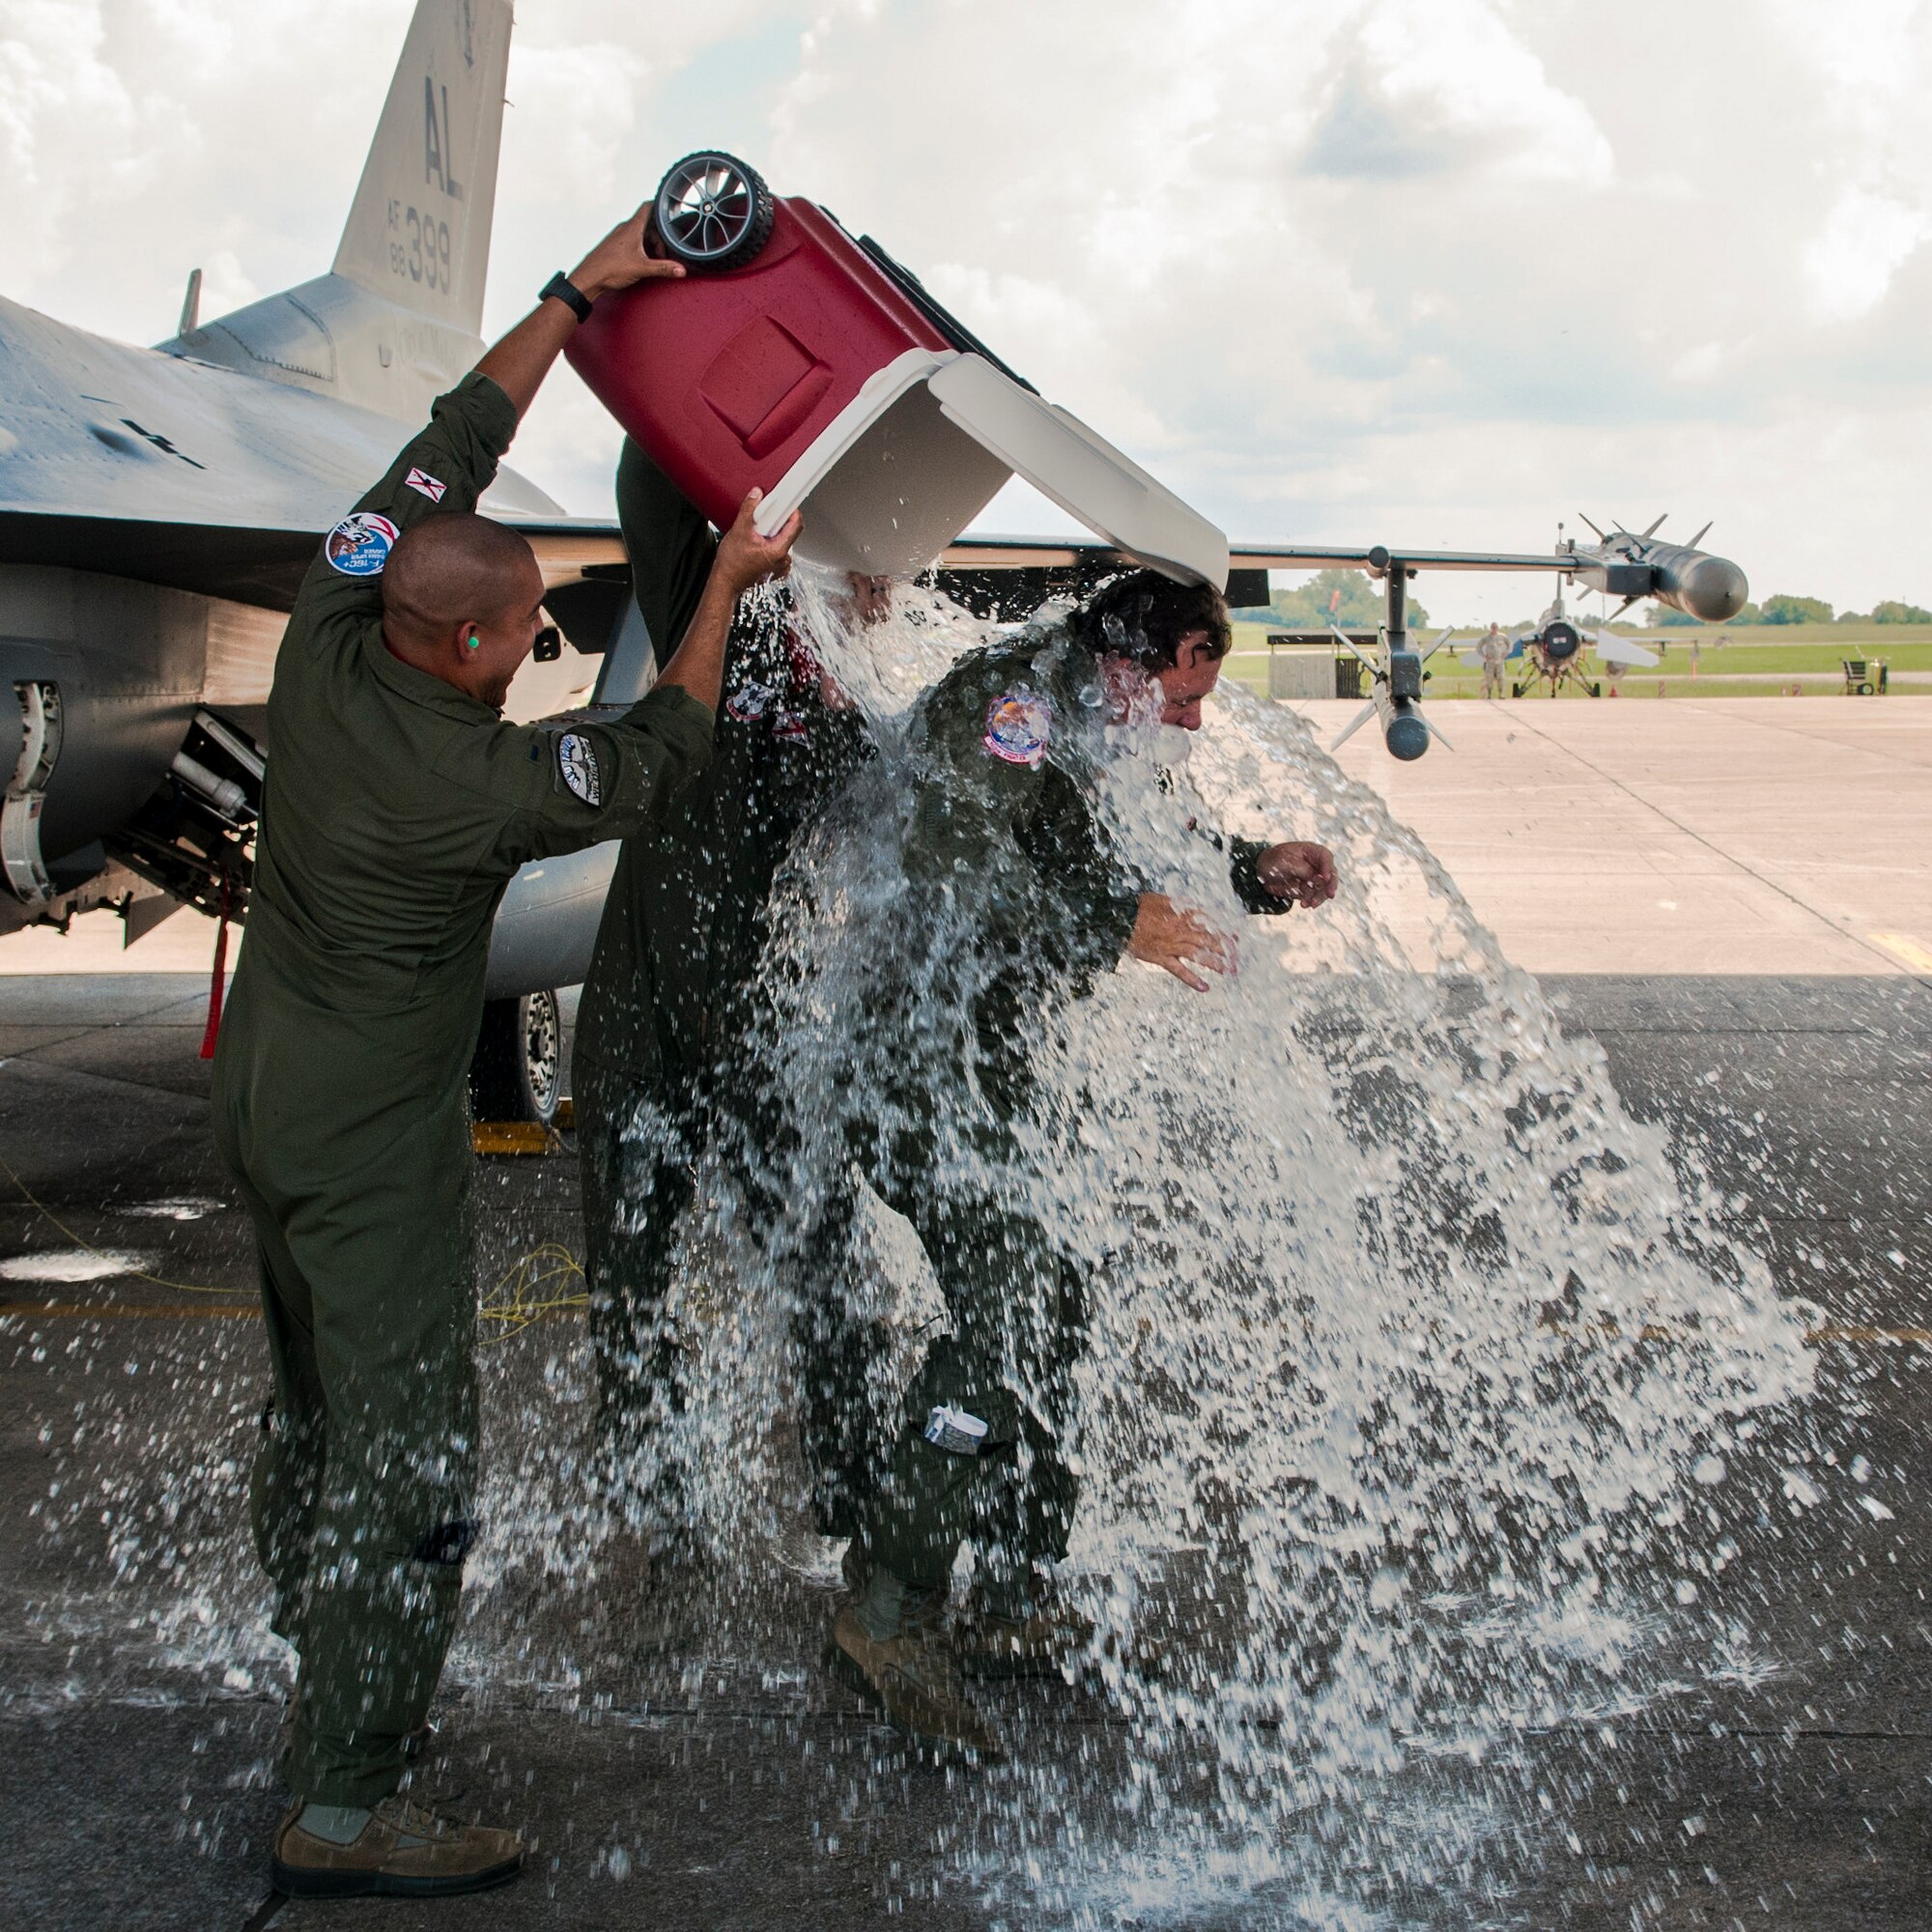 U.S. Air Force Col. Clarence “Ski” Borowski gets iced water dumped on him after his “fini flight” Aug. 7, 2016, on the flightline at Montgomery Regional Air National Guard Base, Ala. Borowski relinquished command of the 187th Operations Group in a change of command ceremony earlier that day. (U.S. Air National Guard photo by Staff Sgt. Jared Rand)